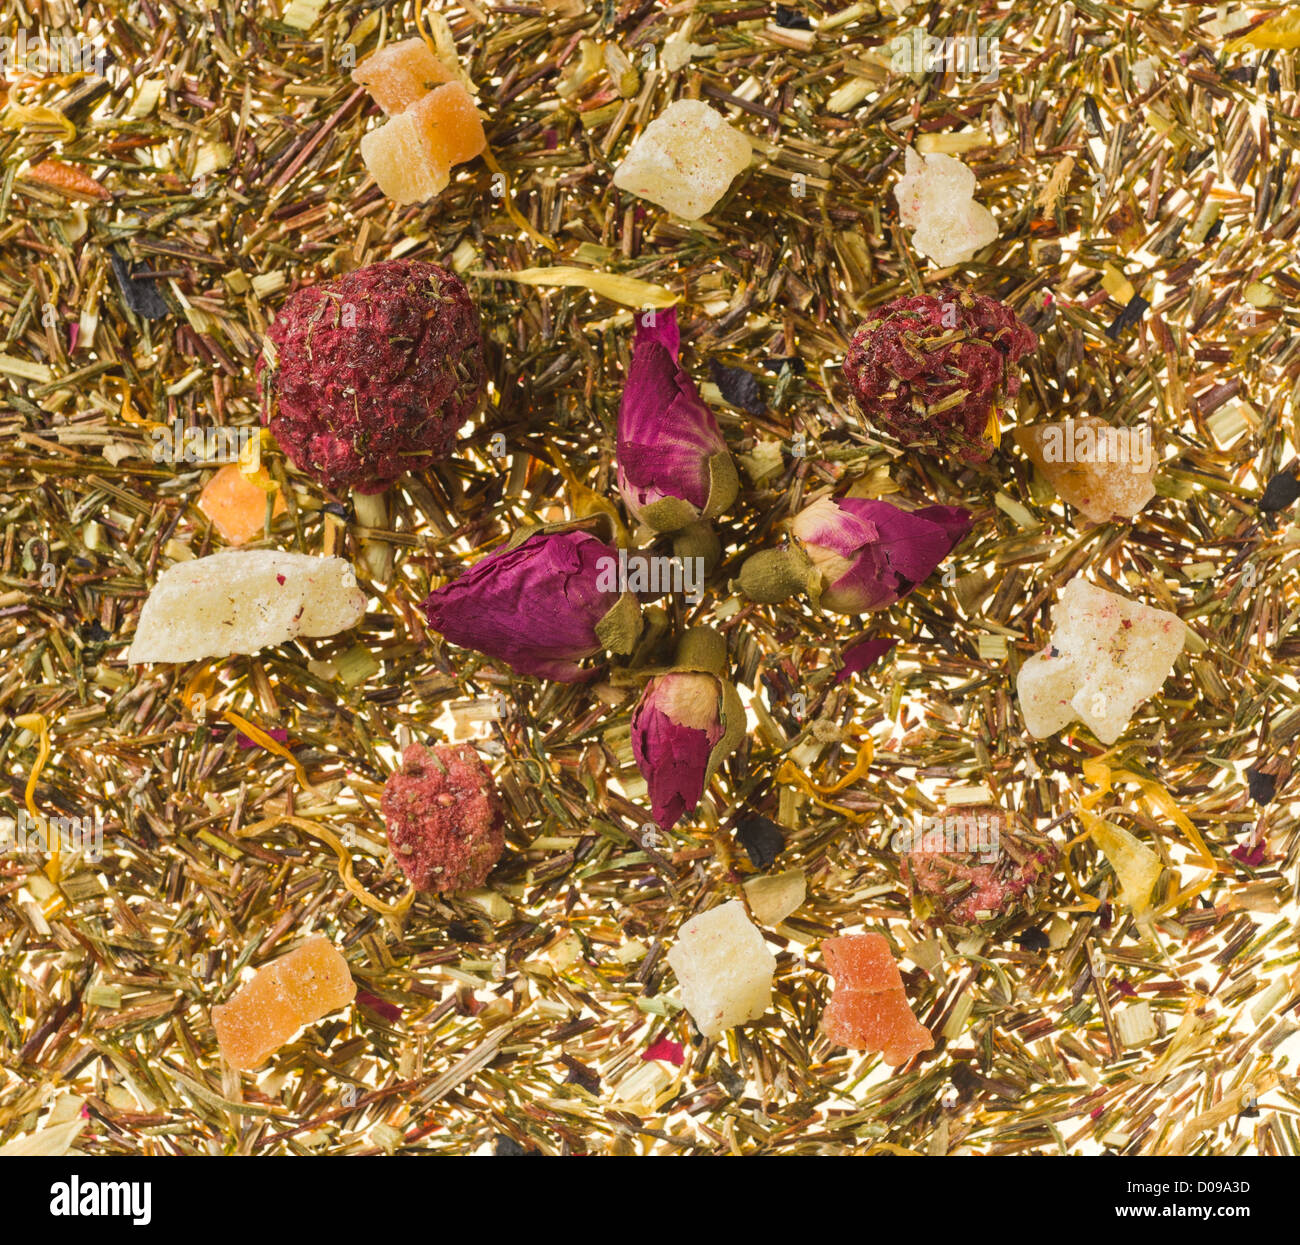 Background image consisting of tea leaves and dry fruits with focus on berries Stock Photo